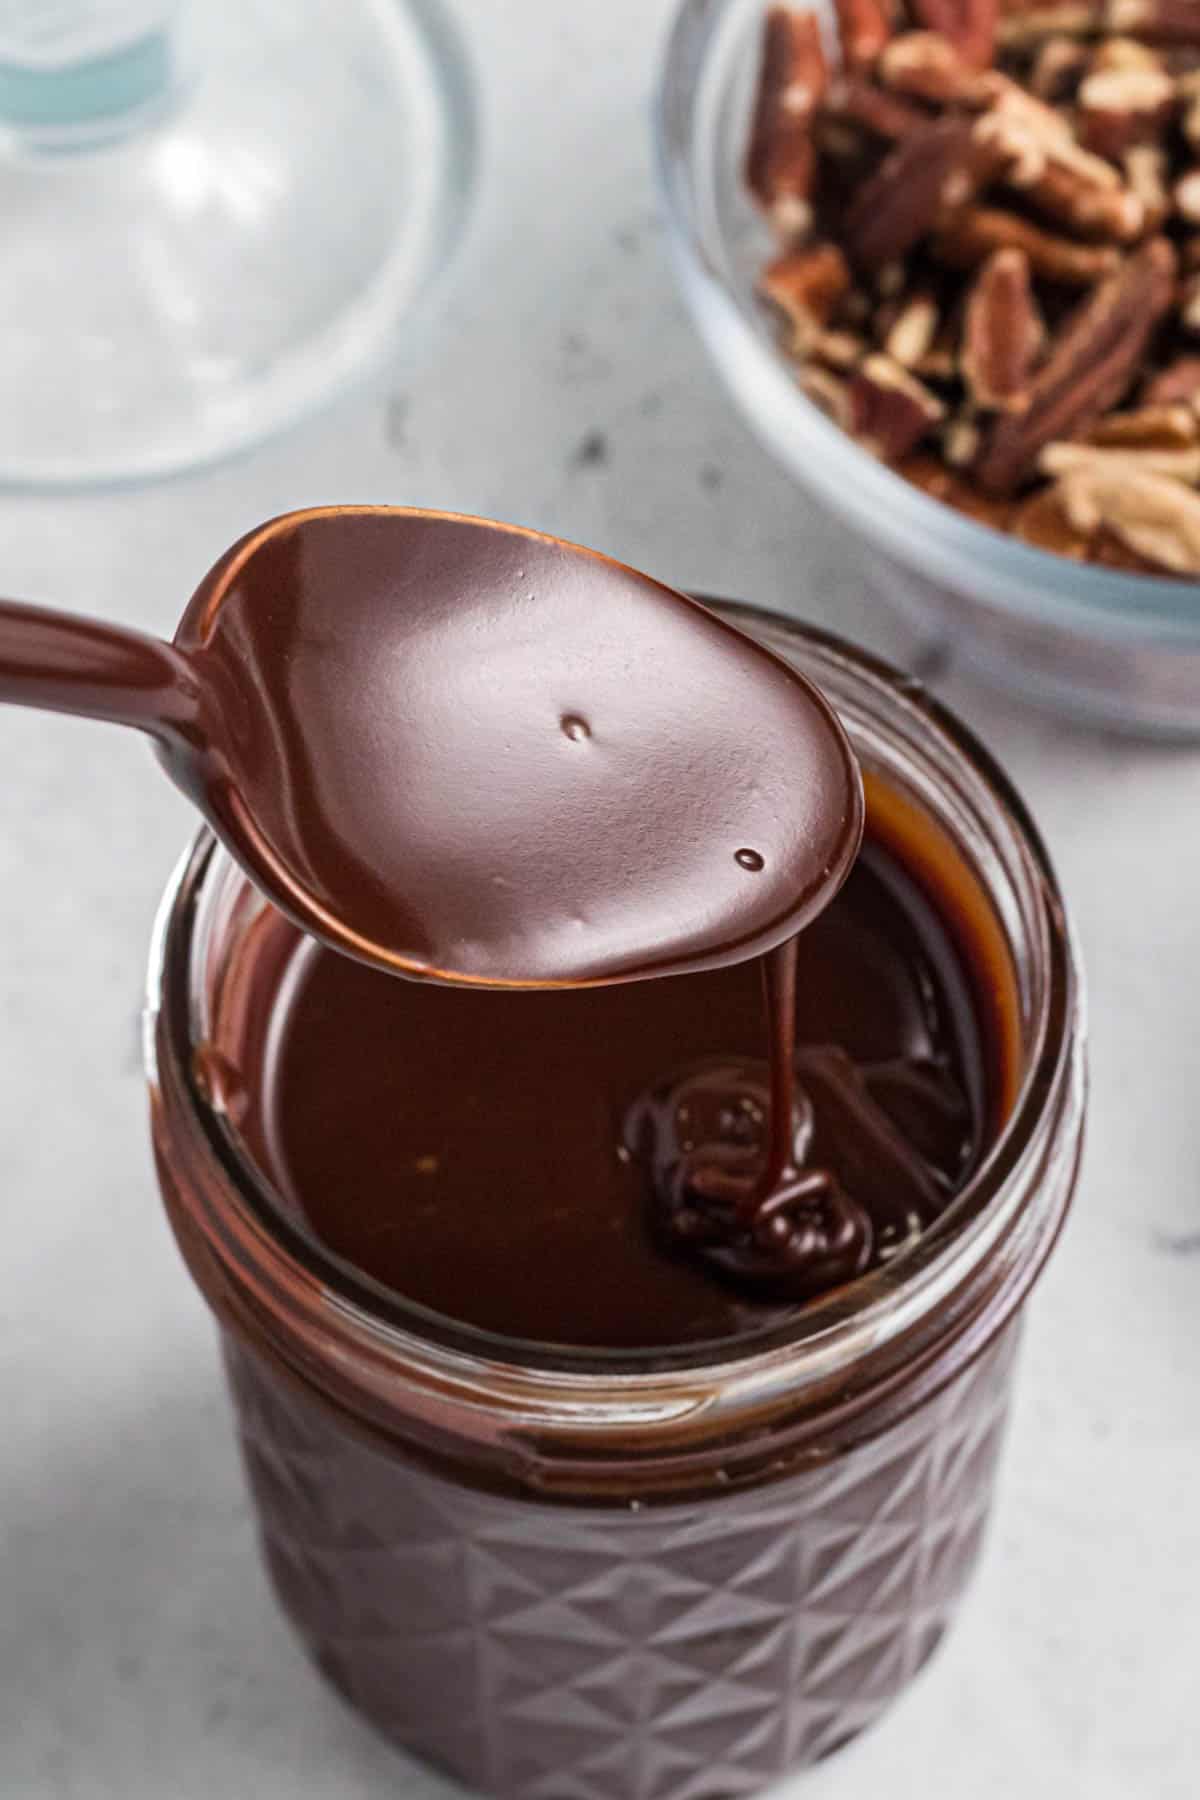 A spoon drizzling homemade hot fudge sauce into a glass jar.